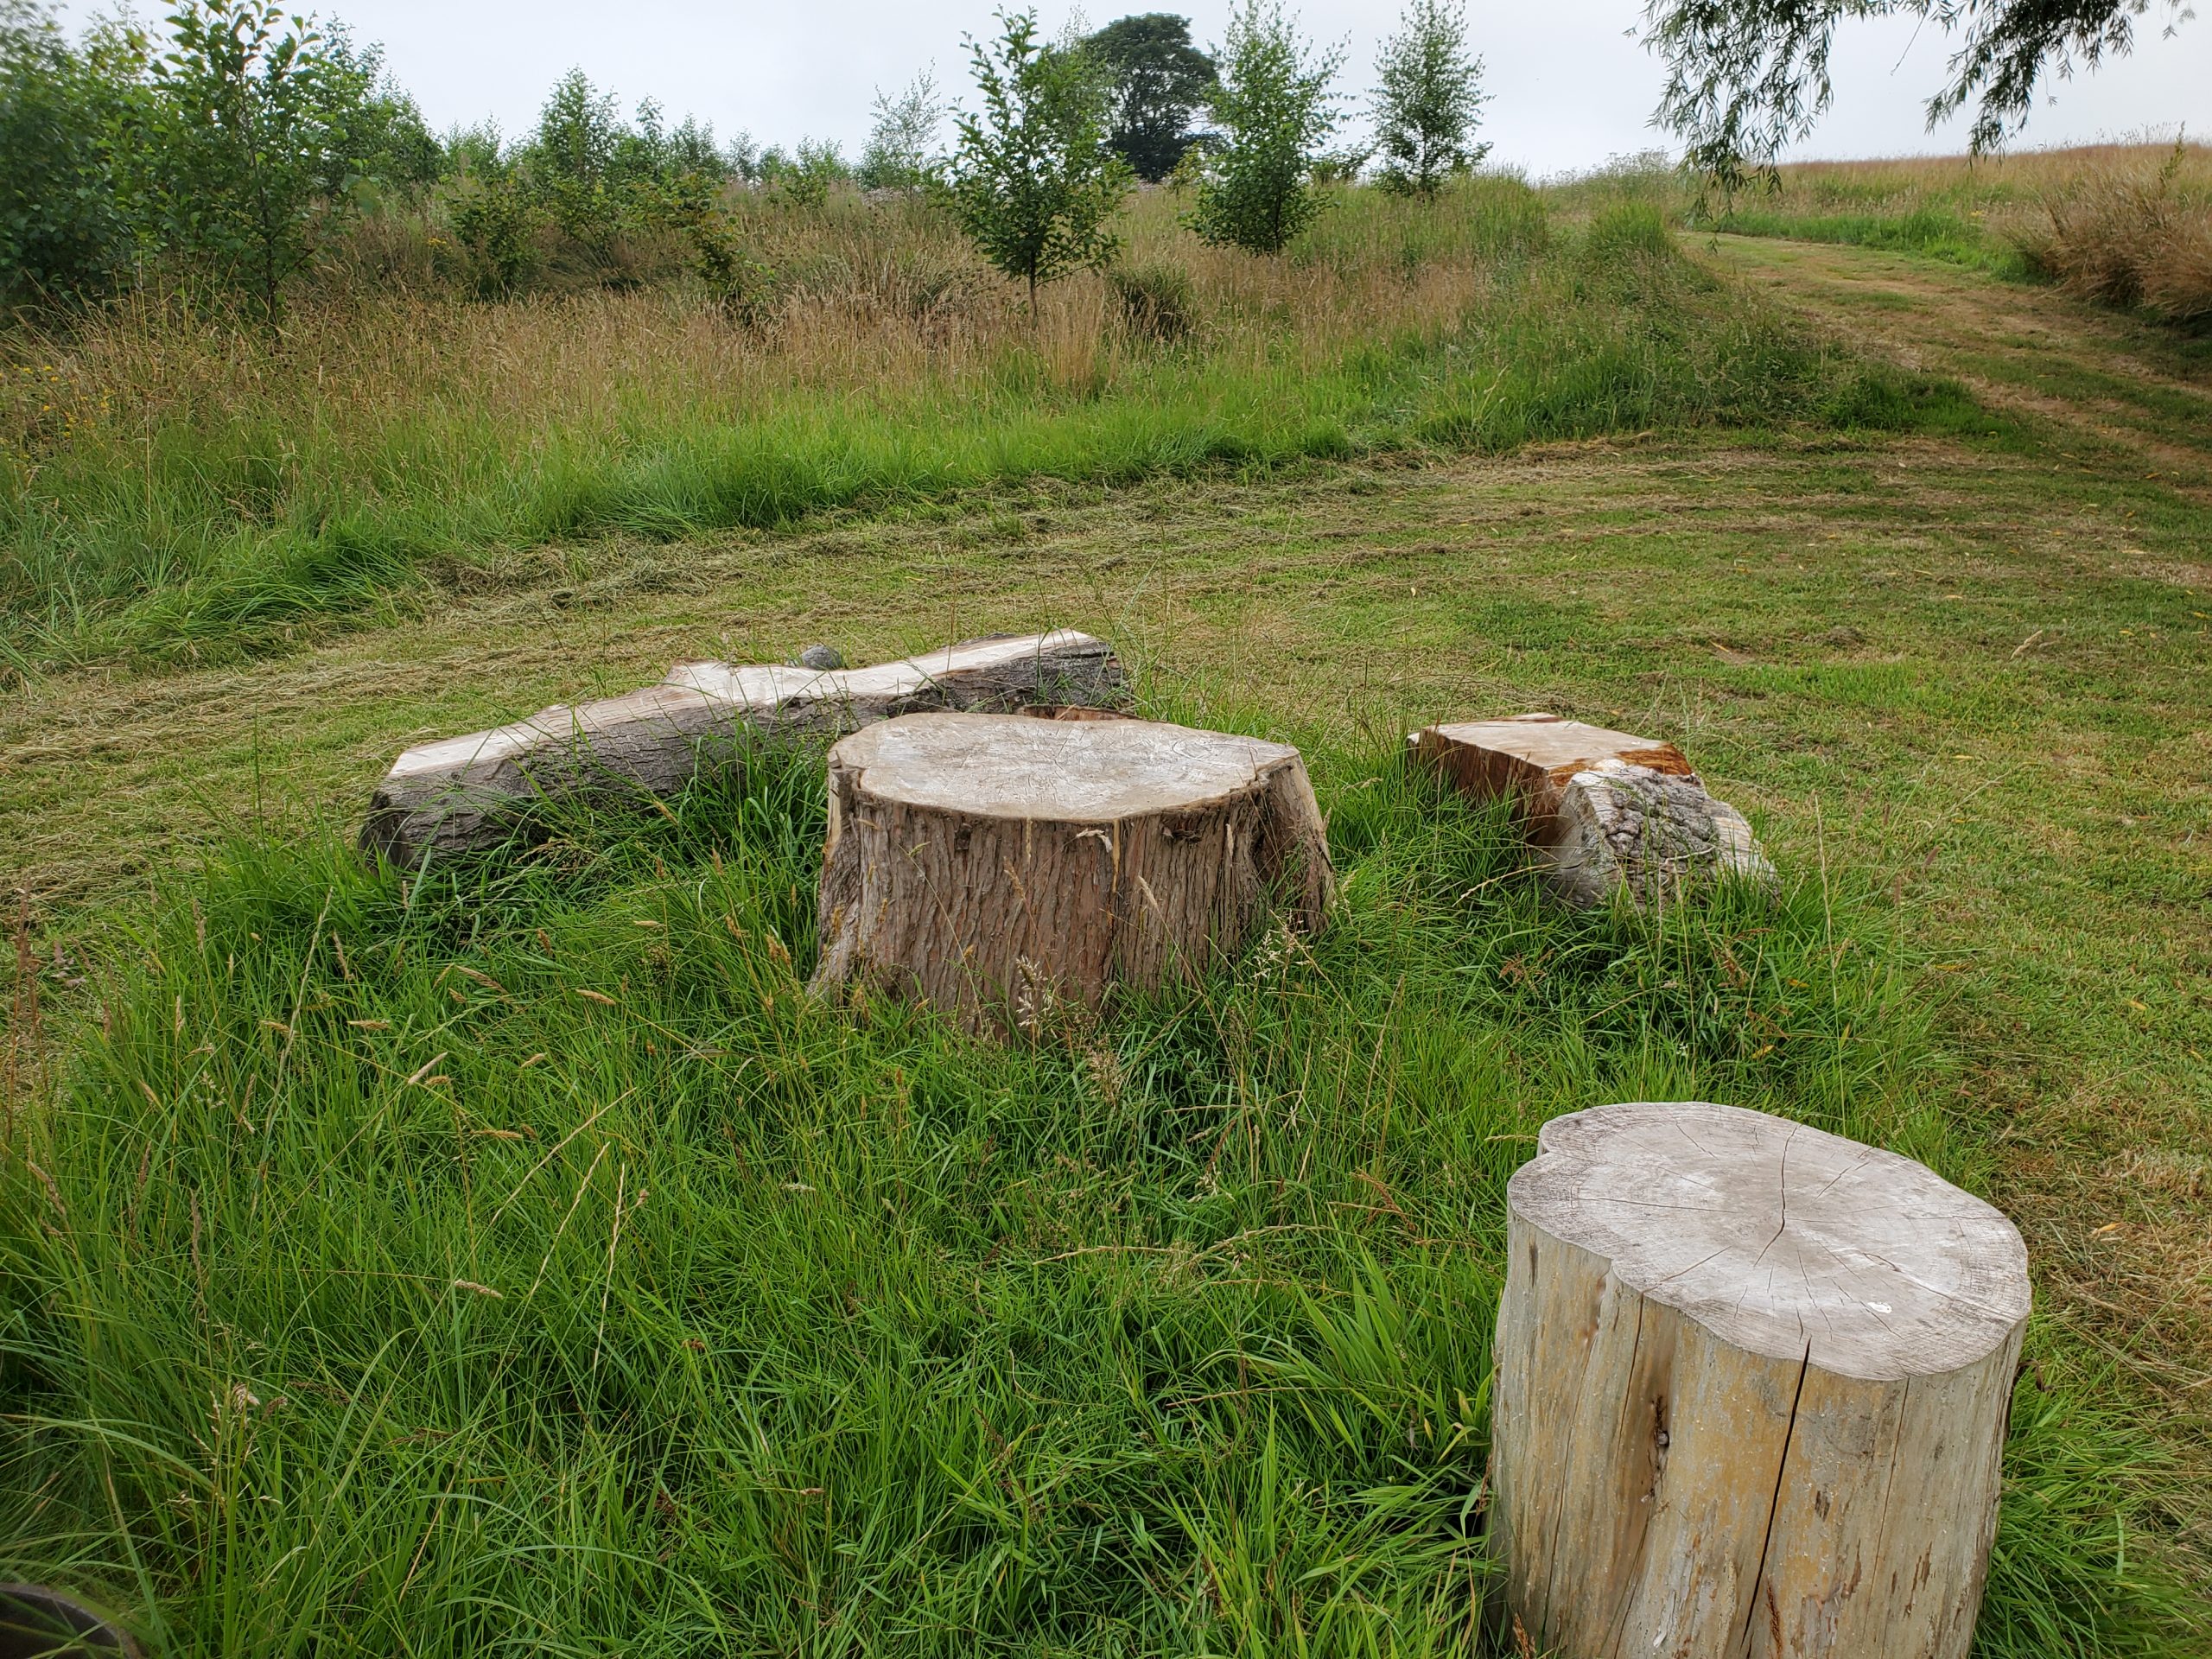 Log benches and table for picnics